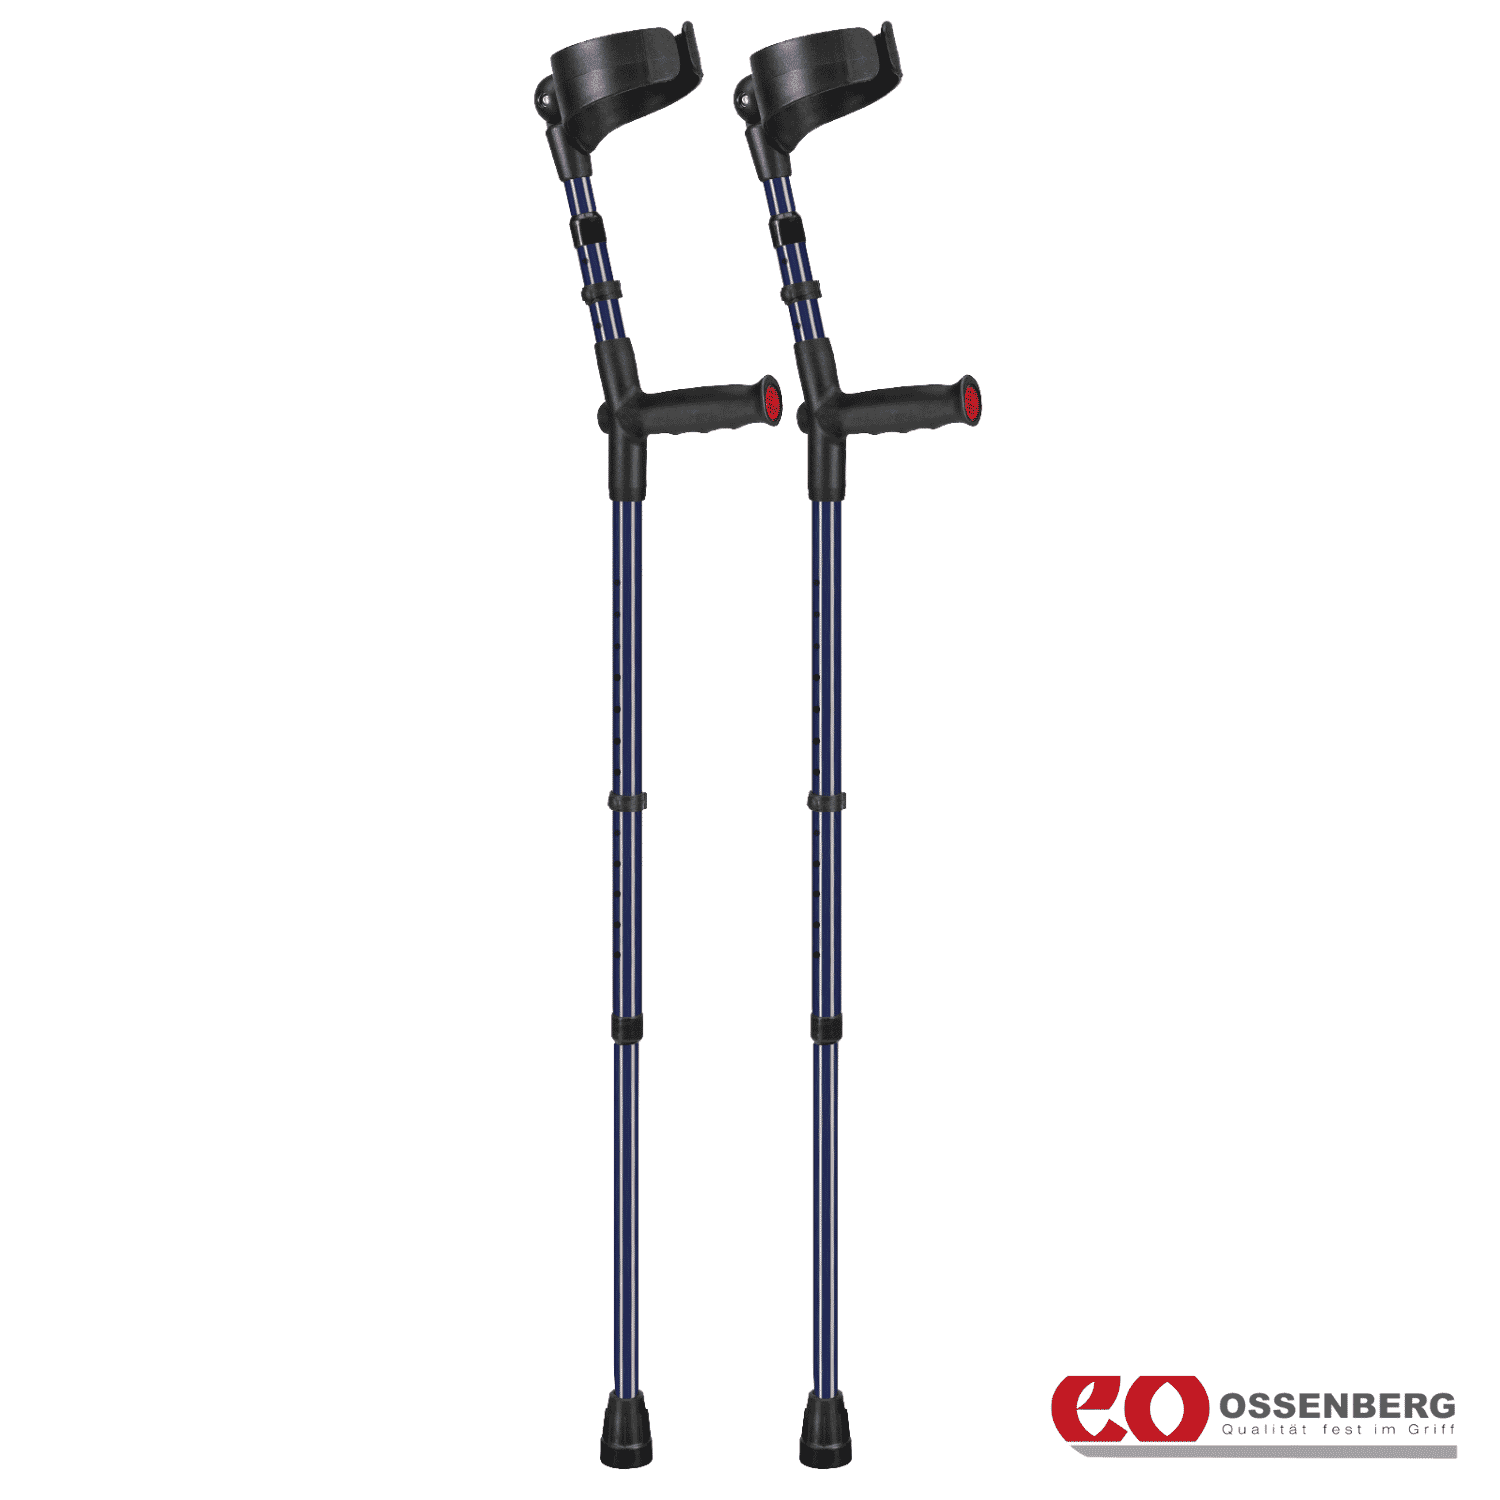 View Ossenberg Soft Grip Double Adjustable Crutches Blue Pair information